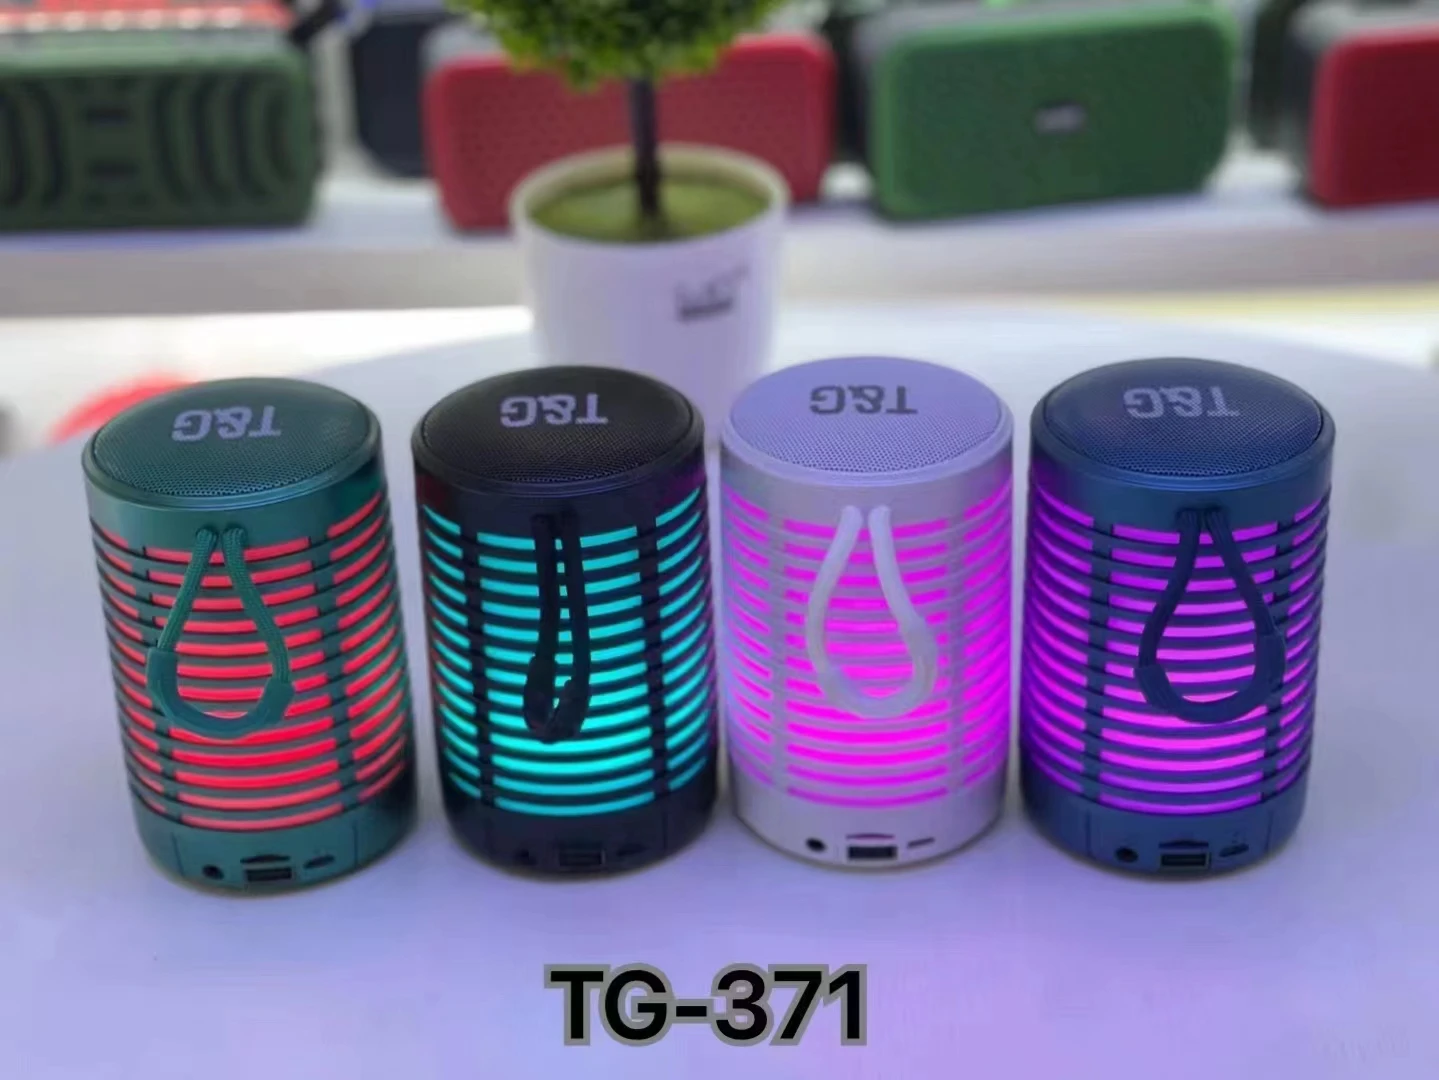 TG speaker Customized production and sales of multi-functional Bluetooth outdoor speakers of various sizes in TG brand factory